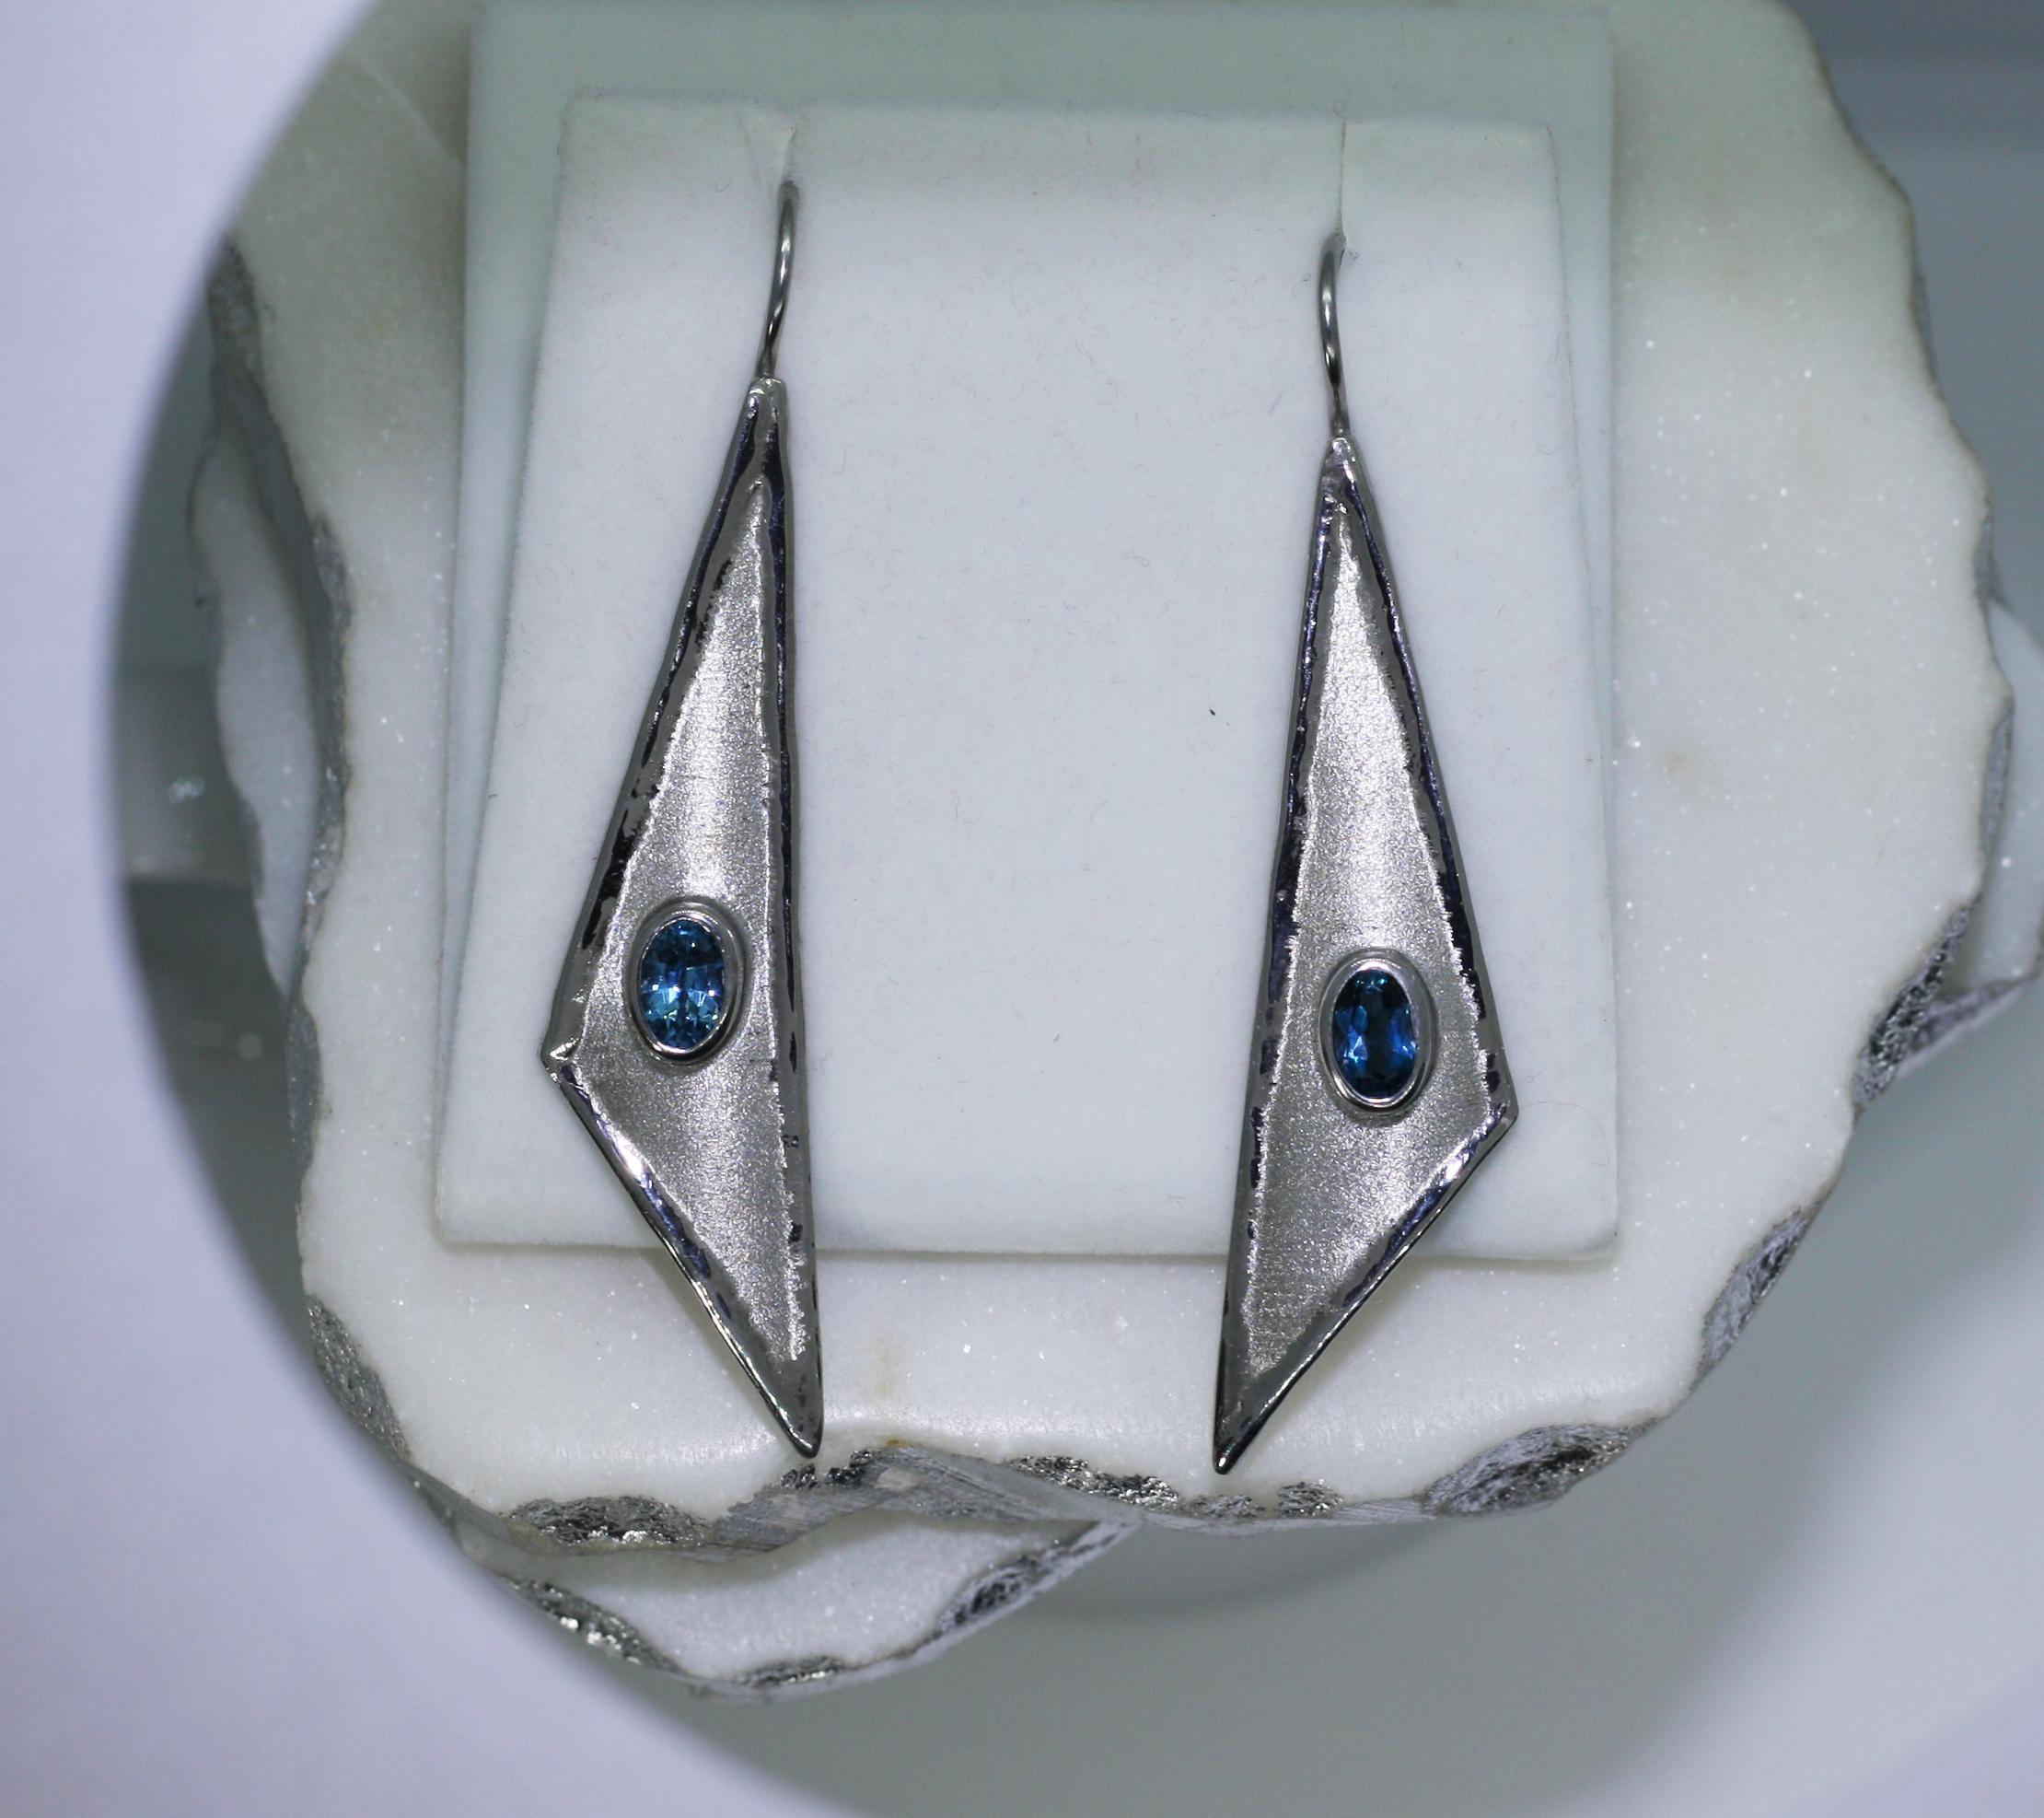 Yianni Creations dangle earrings have been crafted in Greece for Eclyps Collection. This is our bigger size style gorgeous earring all 100% Handmade from Fine Silver 950 purity and features 1.60 Carat Oval Cut London Blue Topaz complemented by